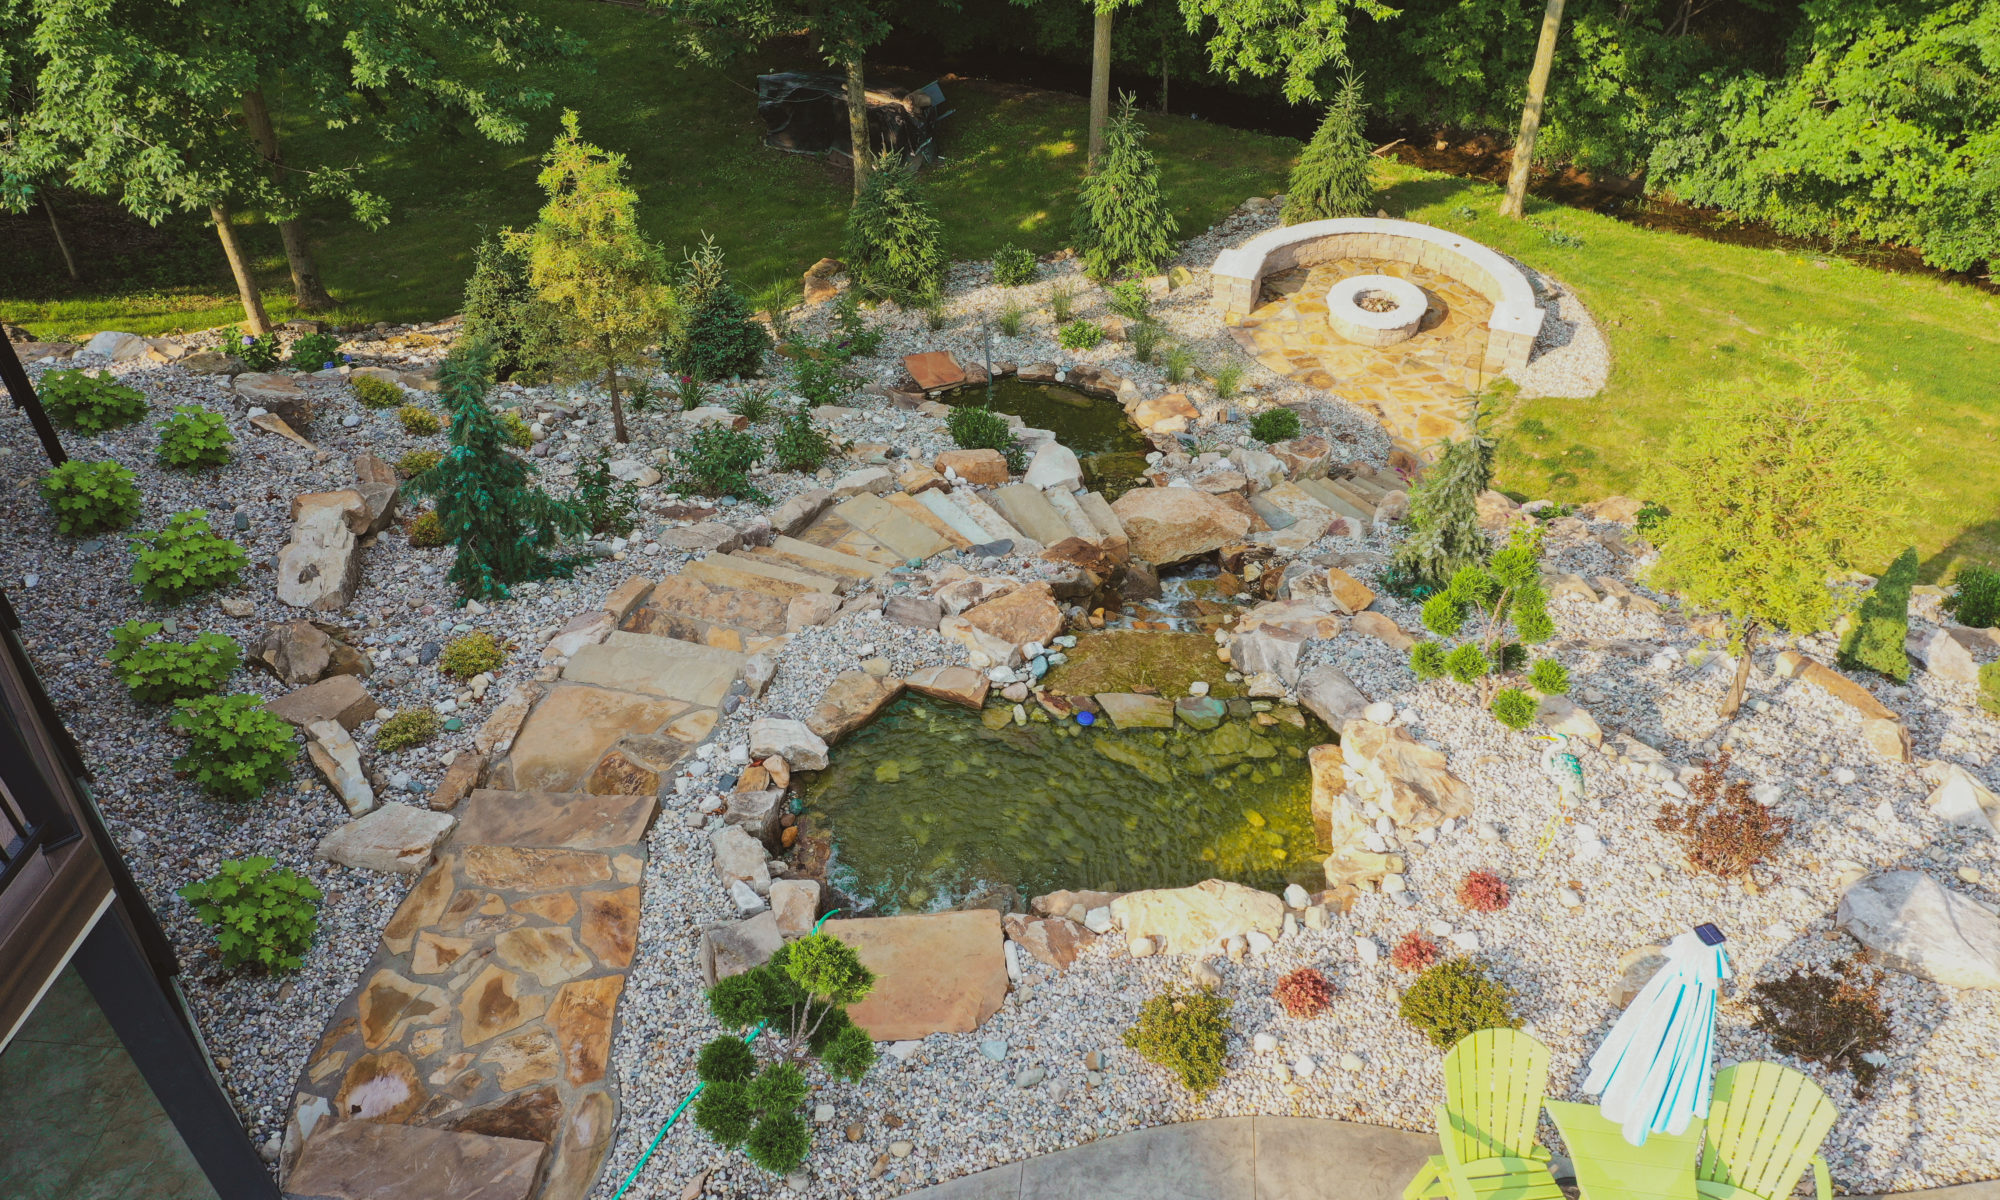 Precision Outdoors the epic waterfall rocks boulders stairs outdoor dream backyard fire pit pool waterfall indianapolis indiana seating wall amazing basketball court landscaping